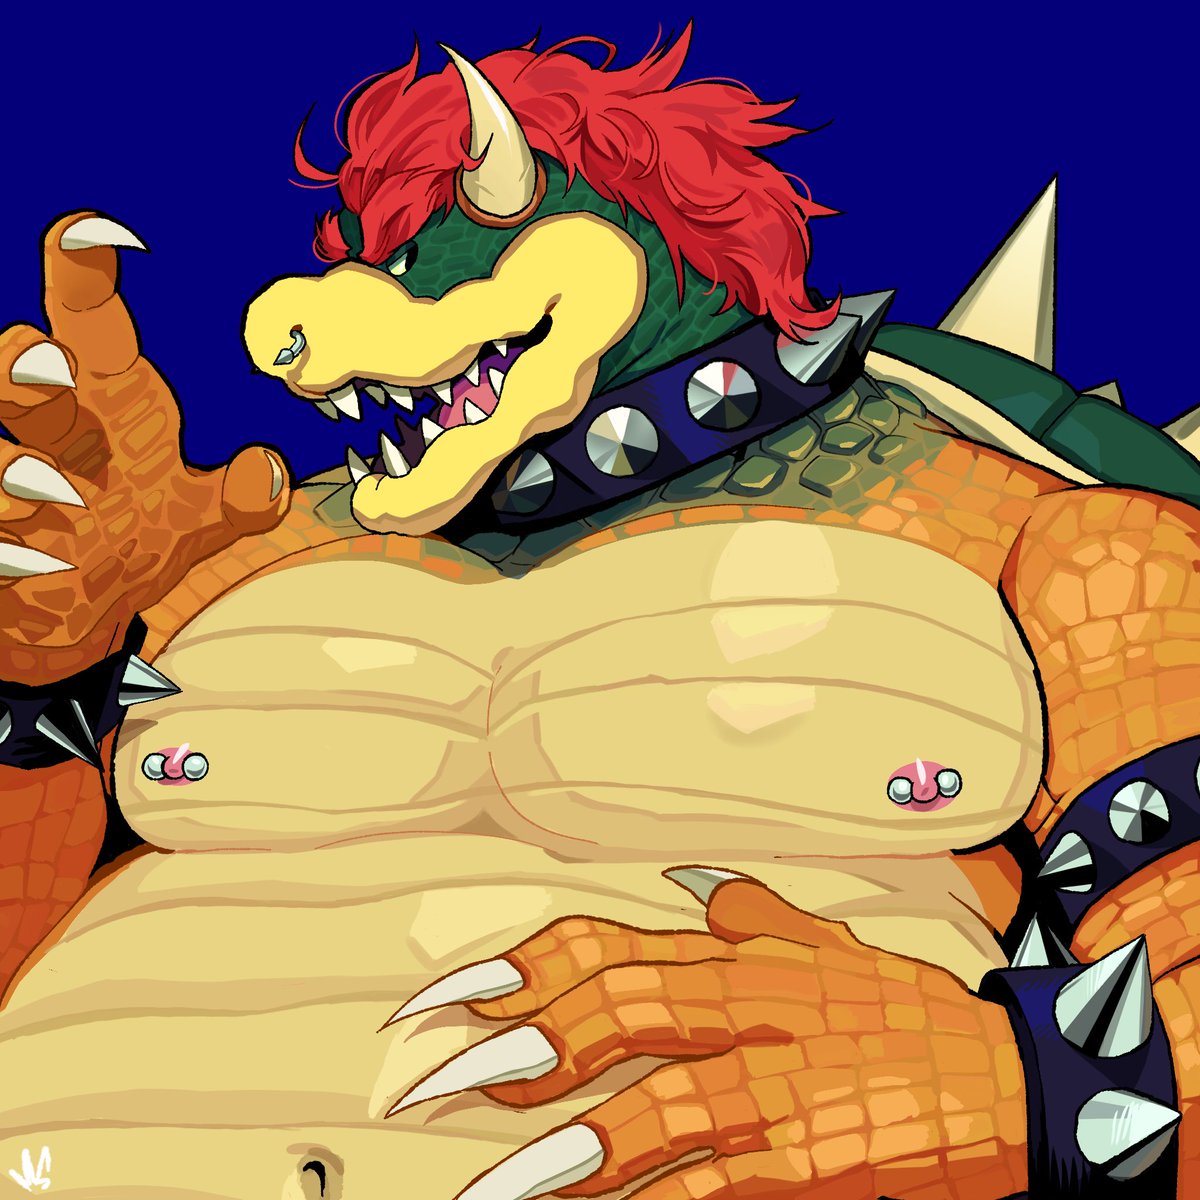 Drew the scary turtle guy 🫶🫶 #bowser #bowserfanart #artist